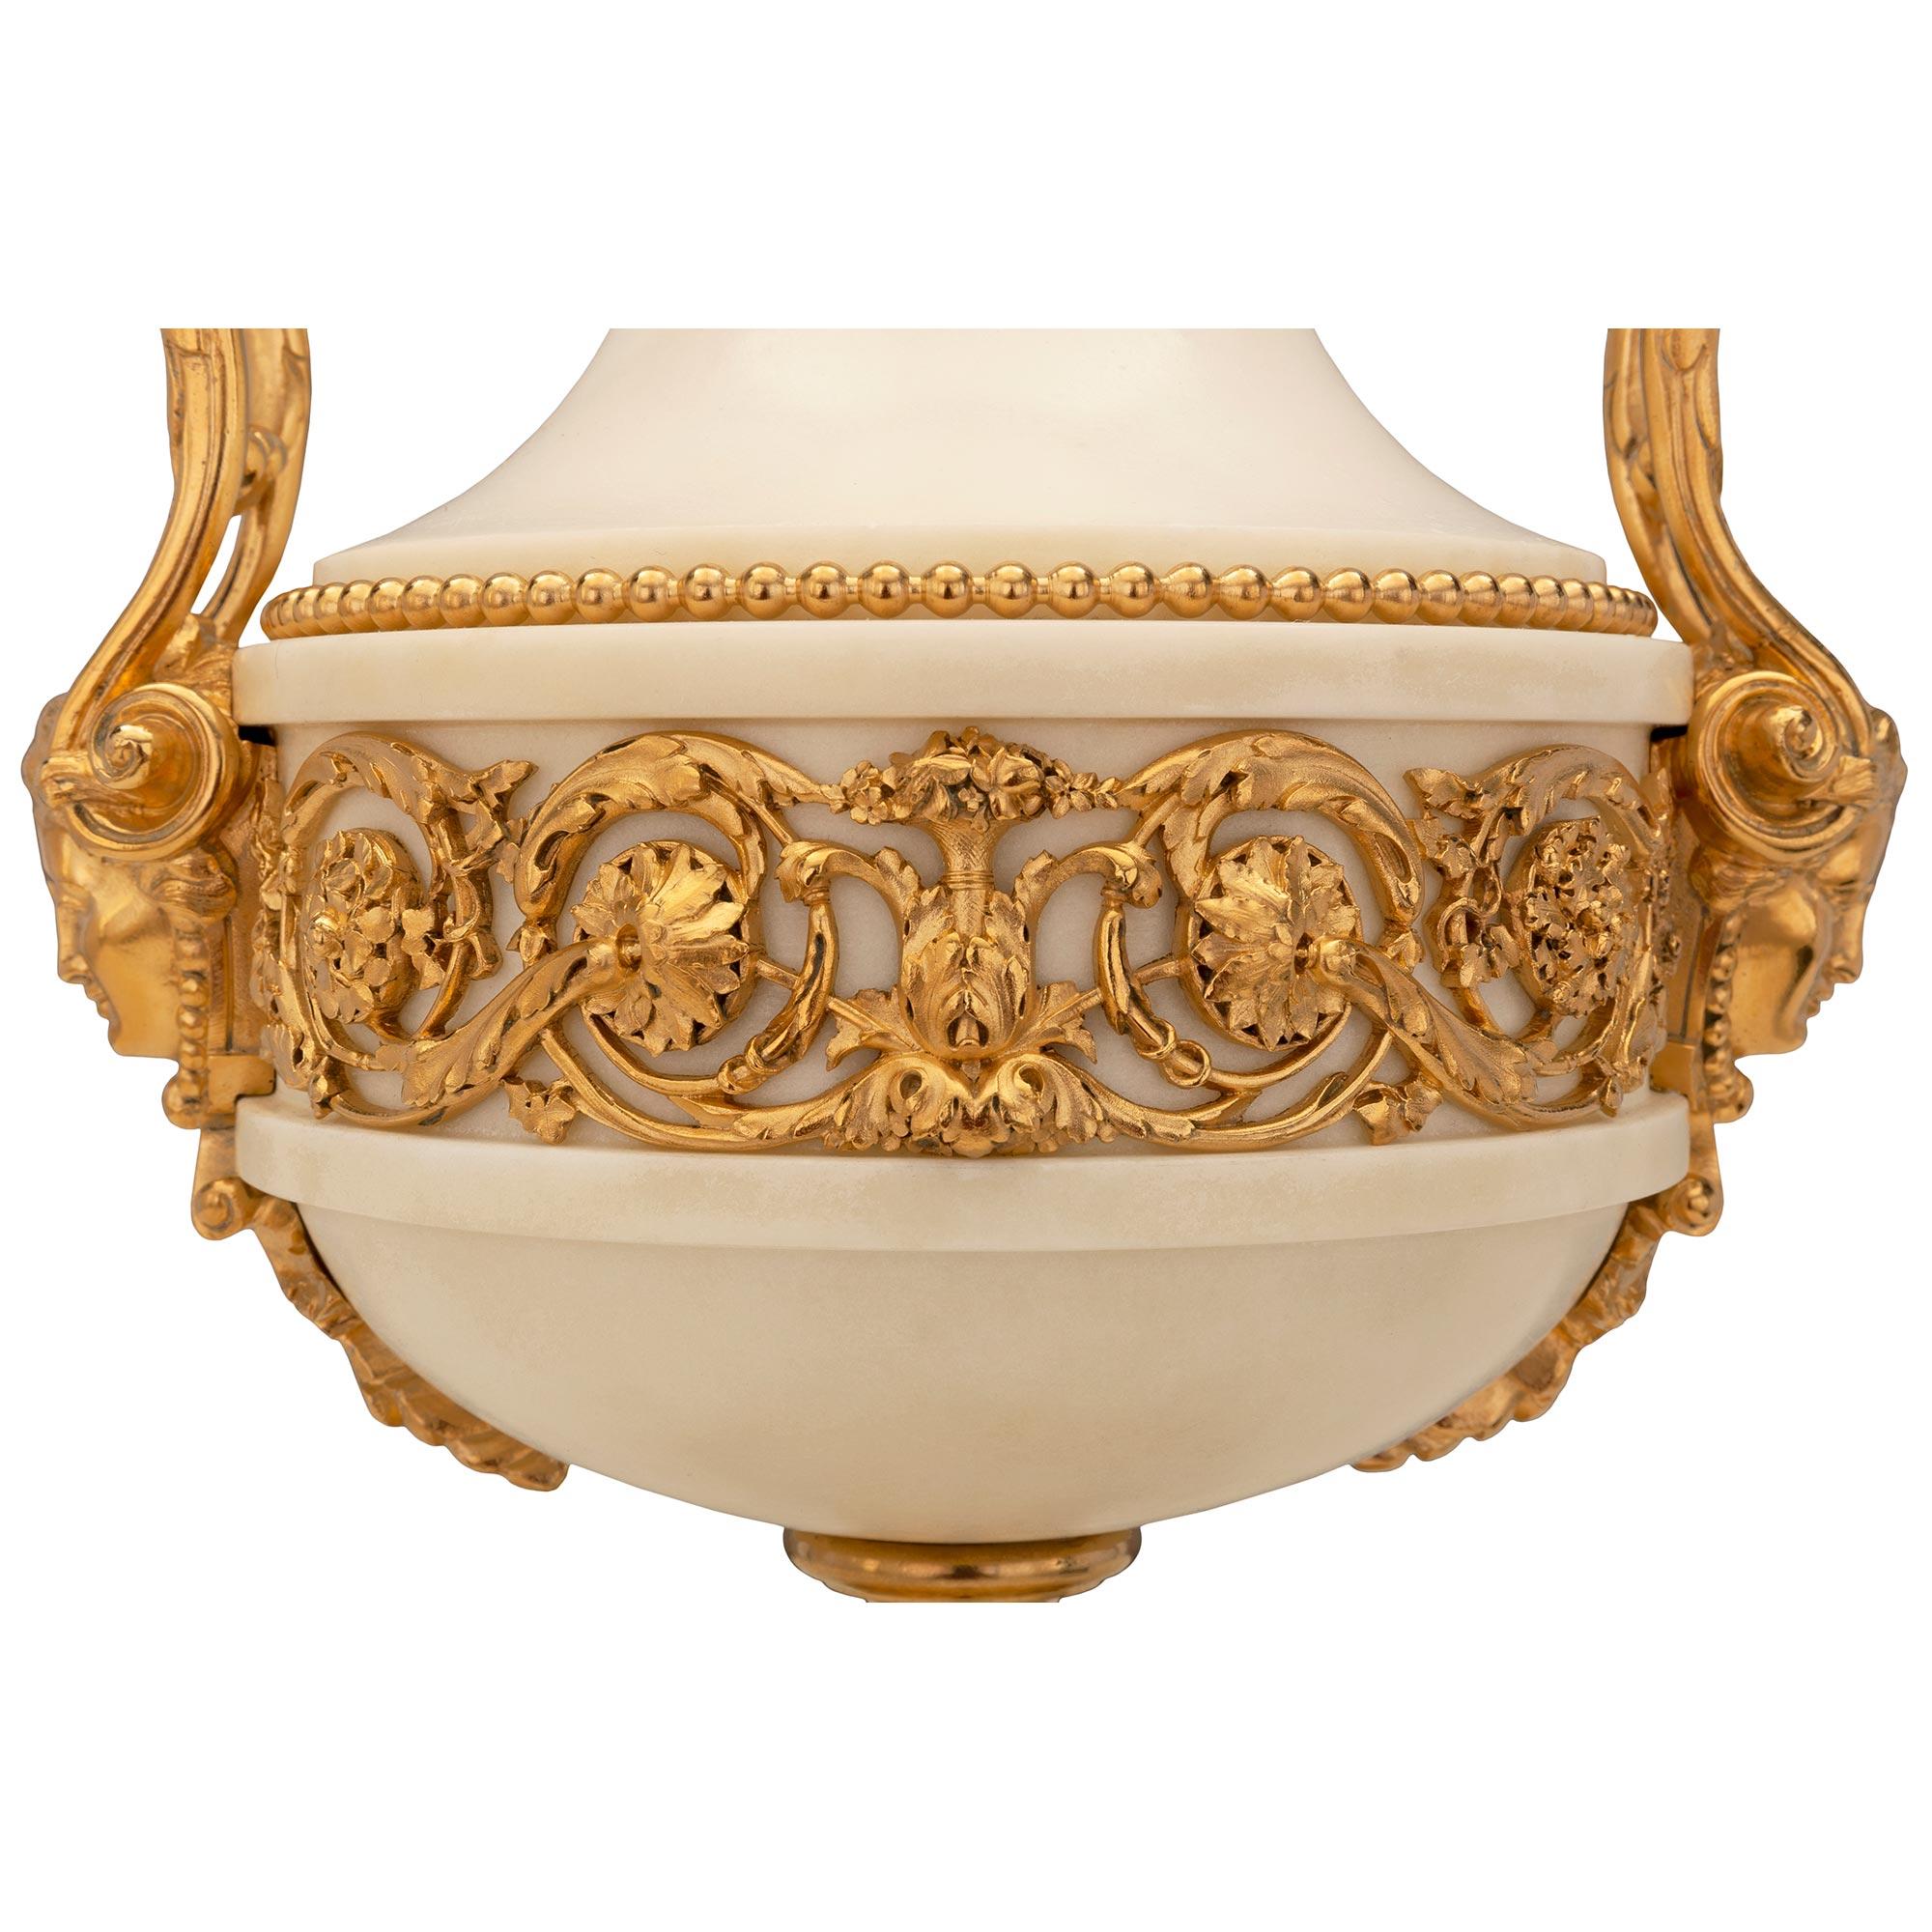 Pair Of French 19th Century Belle Époque Period Marble And Ormolu Lidded Urns For Sale 3